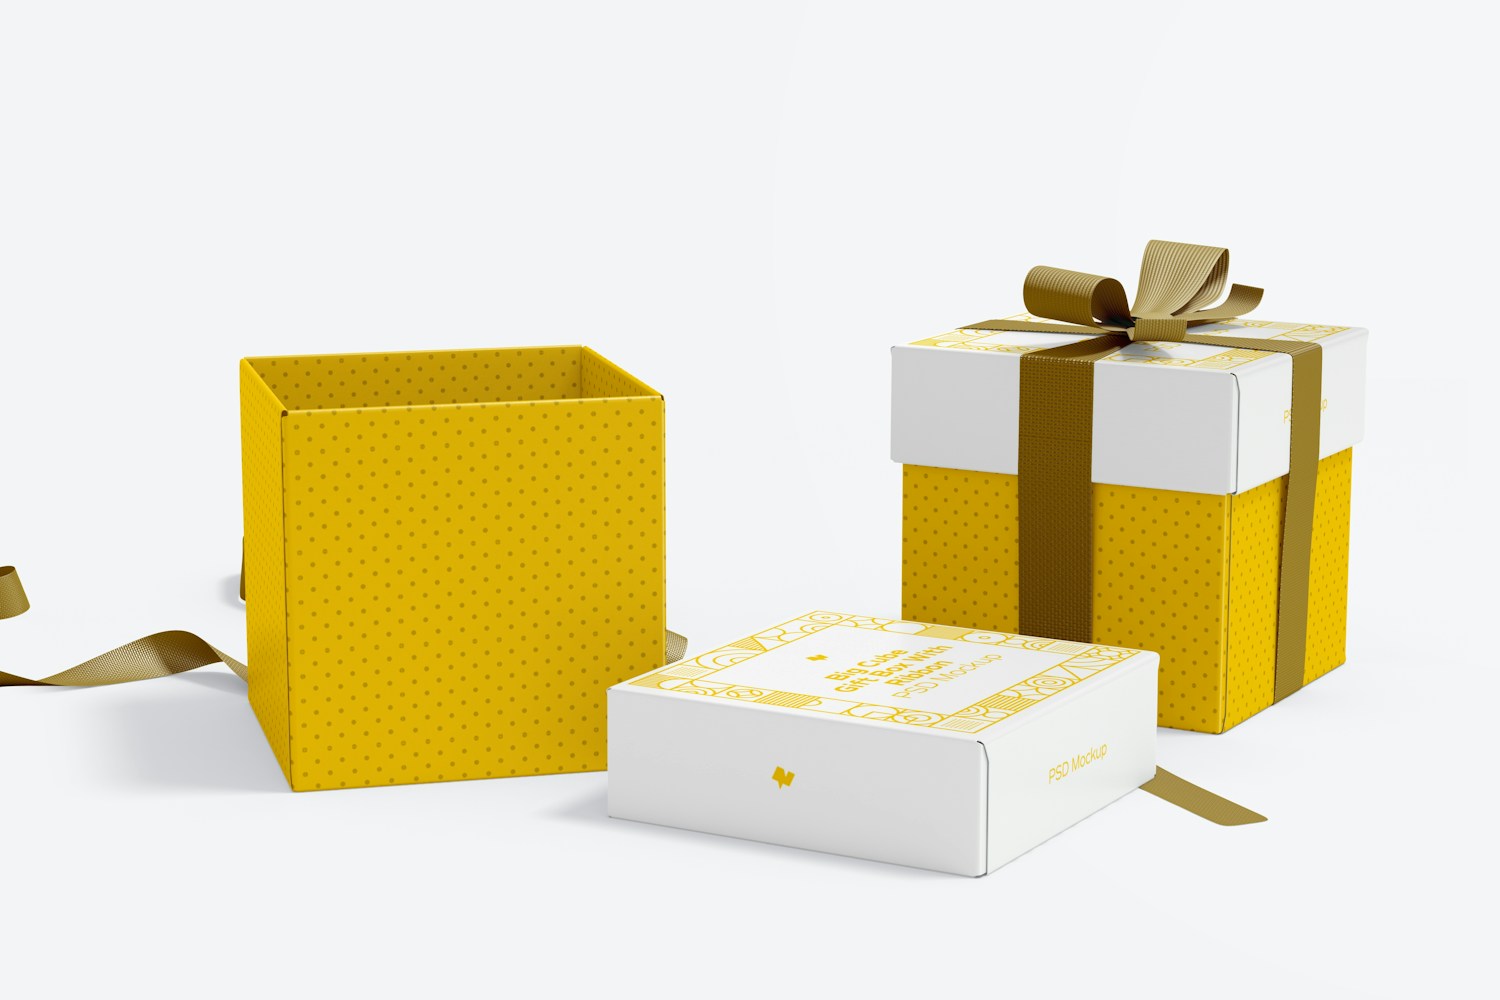 Big Cube Gift Boxes With Ribbon Mockup, Opened and Closed